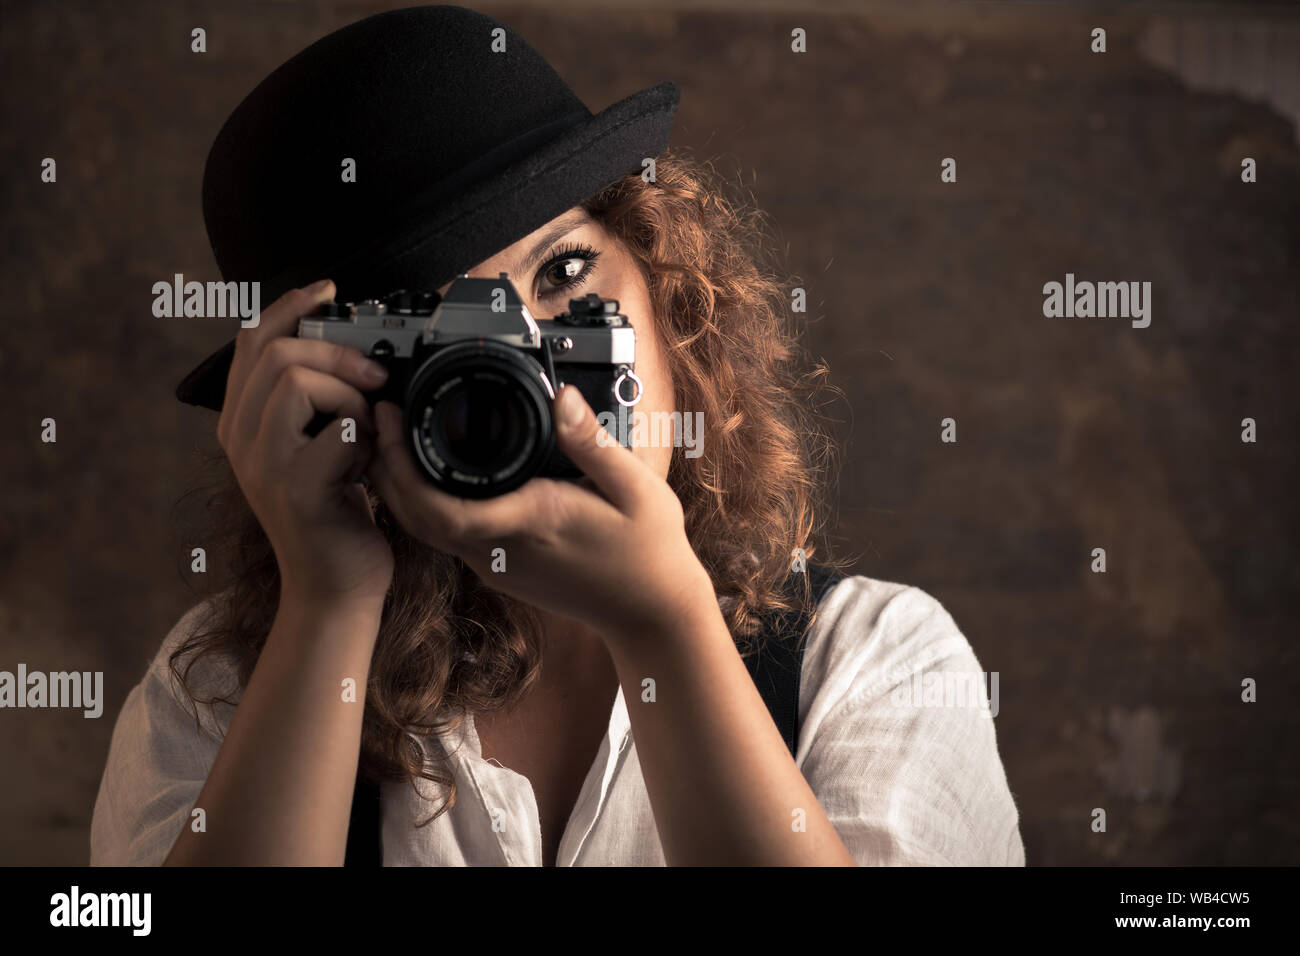 Woman Photographer with Bowler and Suspenders Holding a Camera Stock Photo